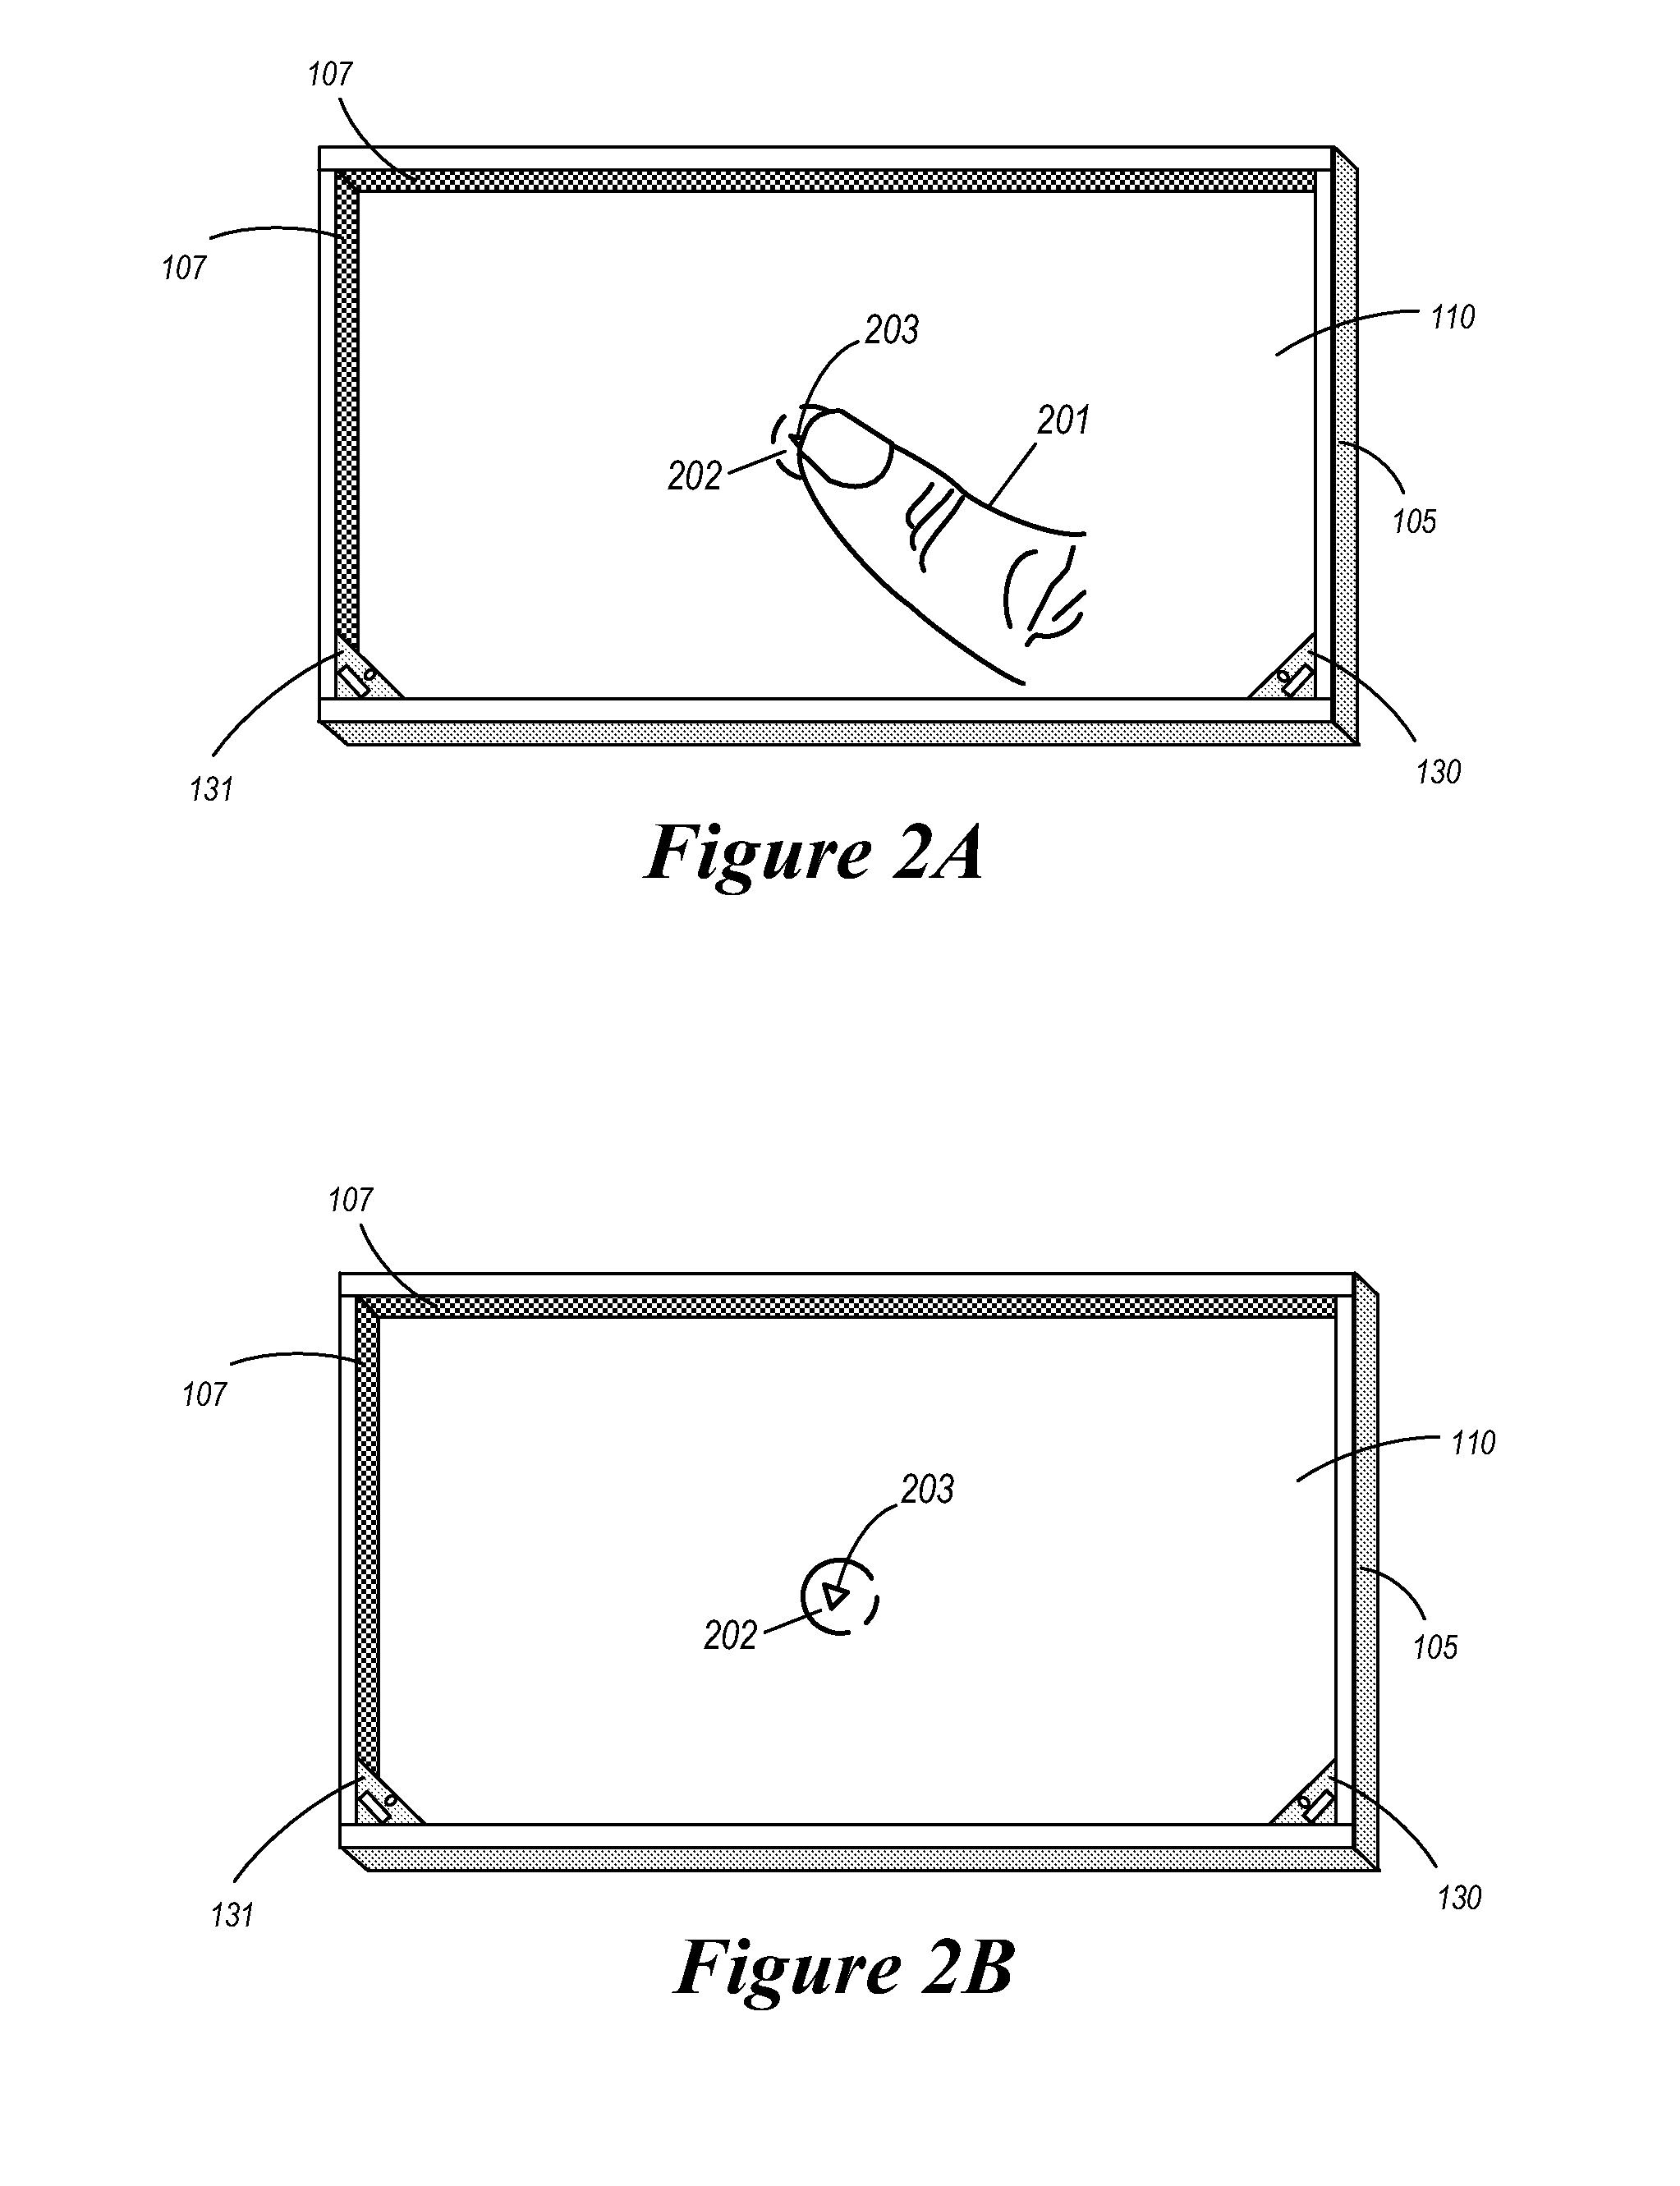 Position Sensing System With Edge Positioning Enhancement